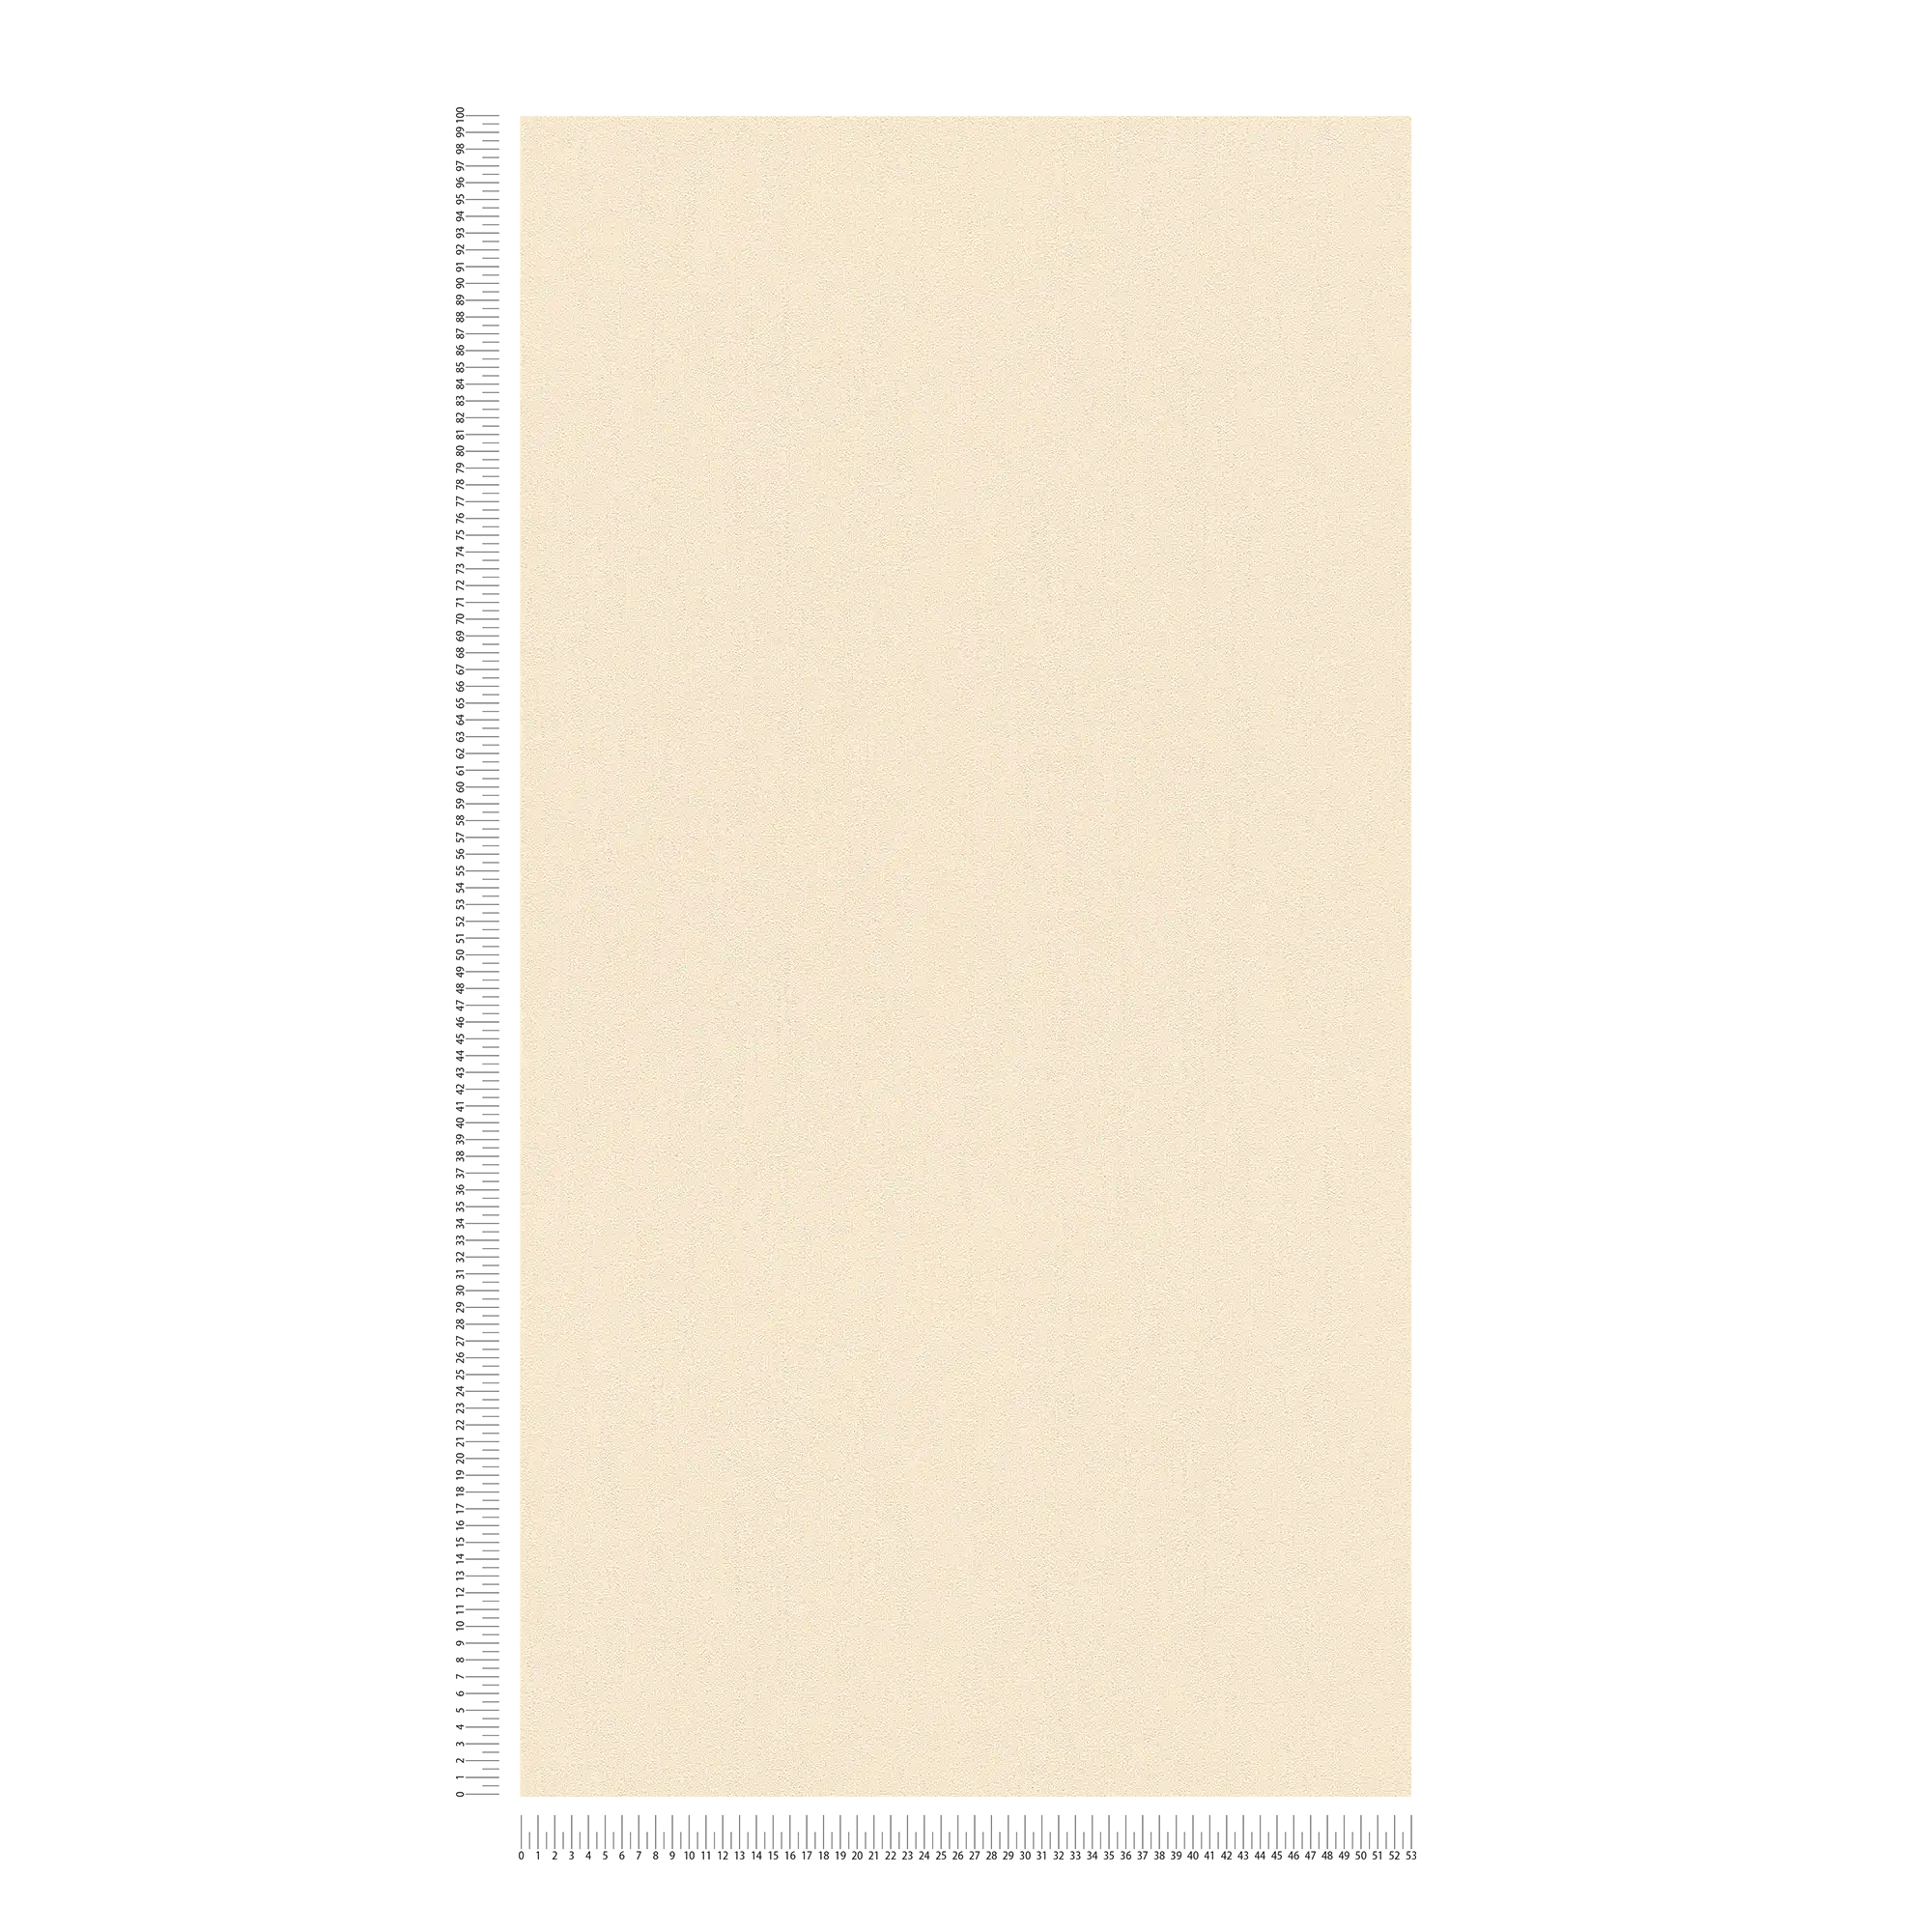             Plain wallpaper Karl LAGERFELD with structure embossing - beige
        